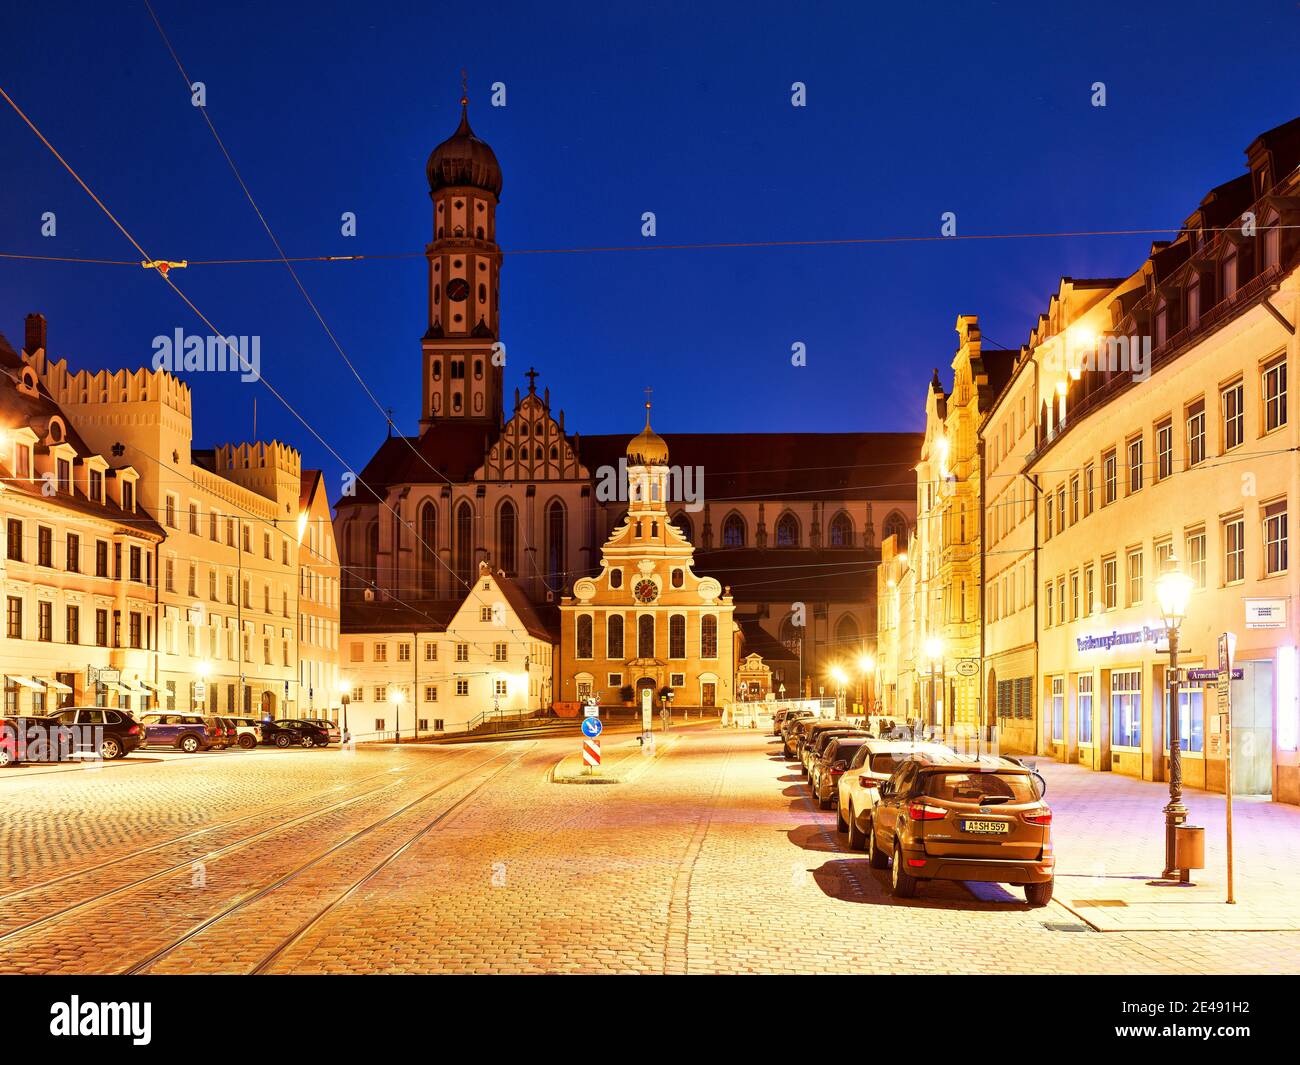 Basilica, Catholic church, Protestant church, street, square, cobblestone pavement, bus stop, house, old town, monument, place of interest, historical building, listed, full moon, full moon night Stock Photo